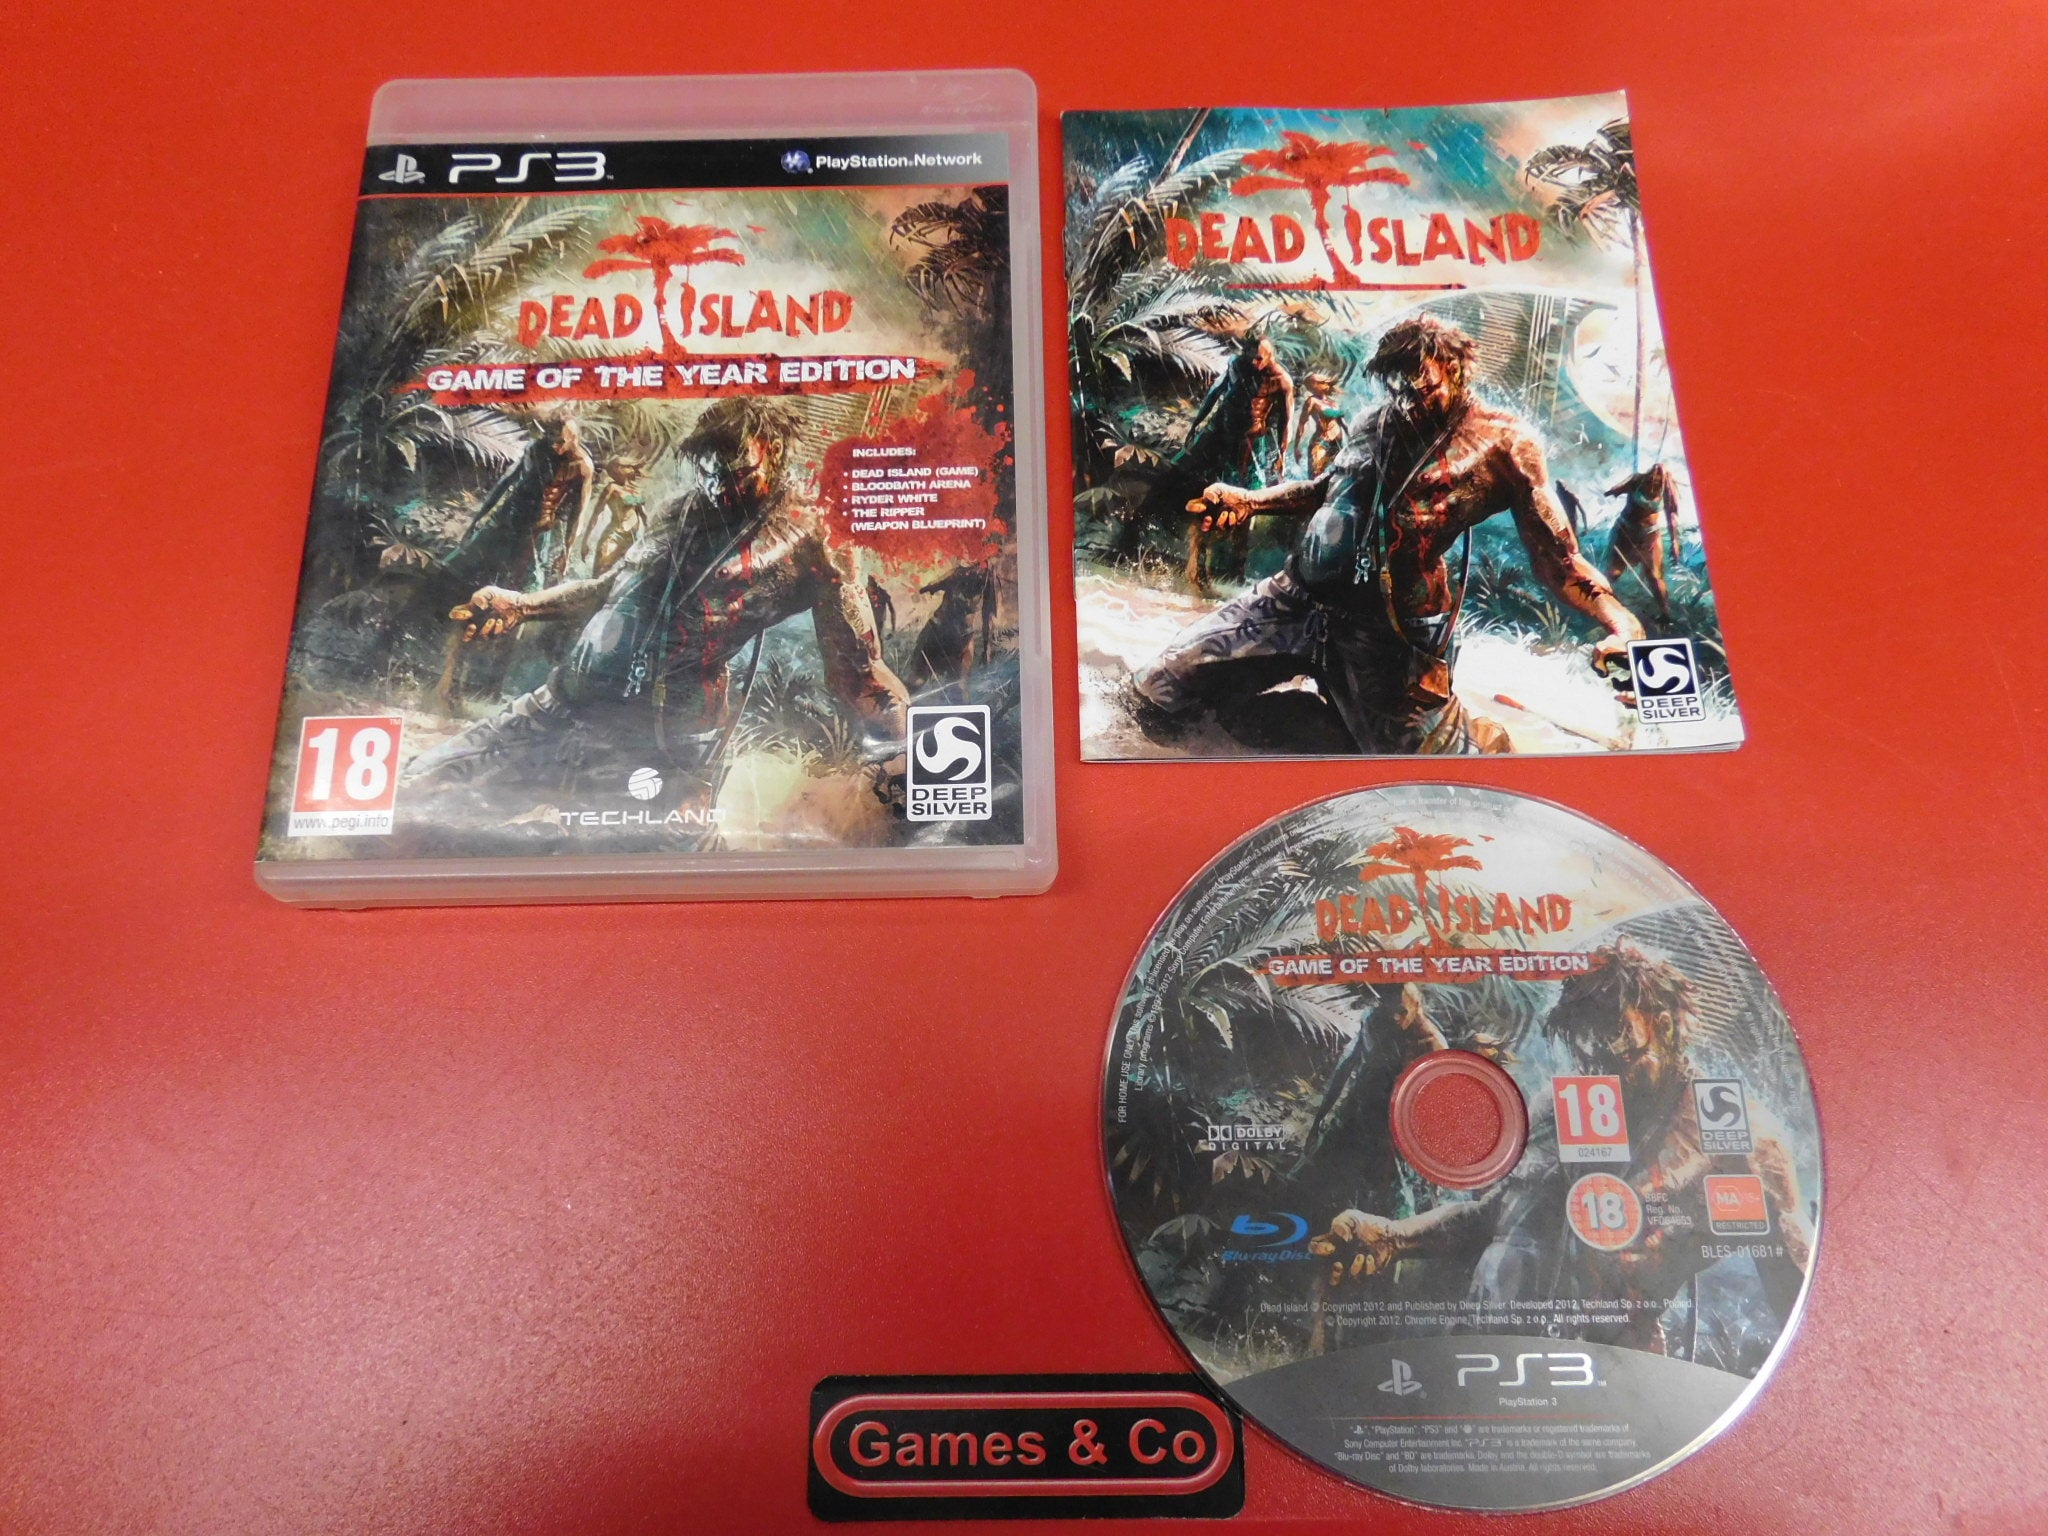 DEAD ISLAND GAME OF THE YEAR EDITION